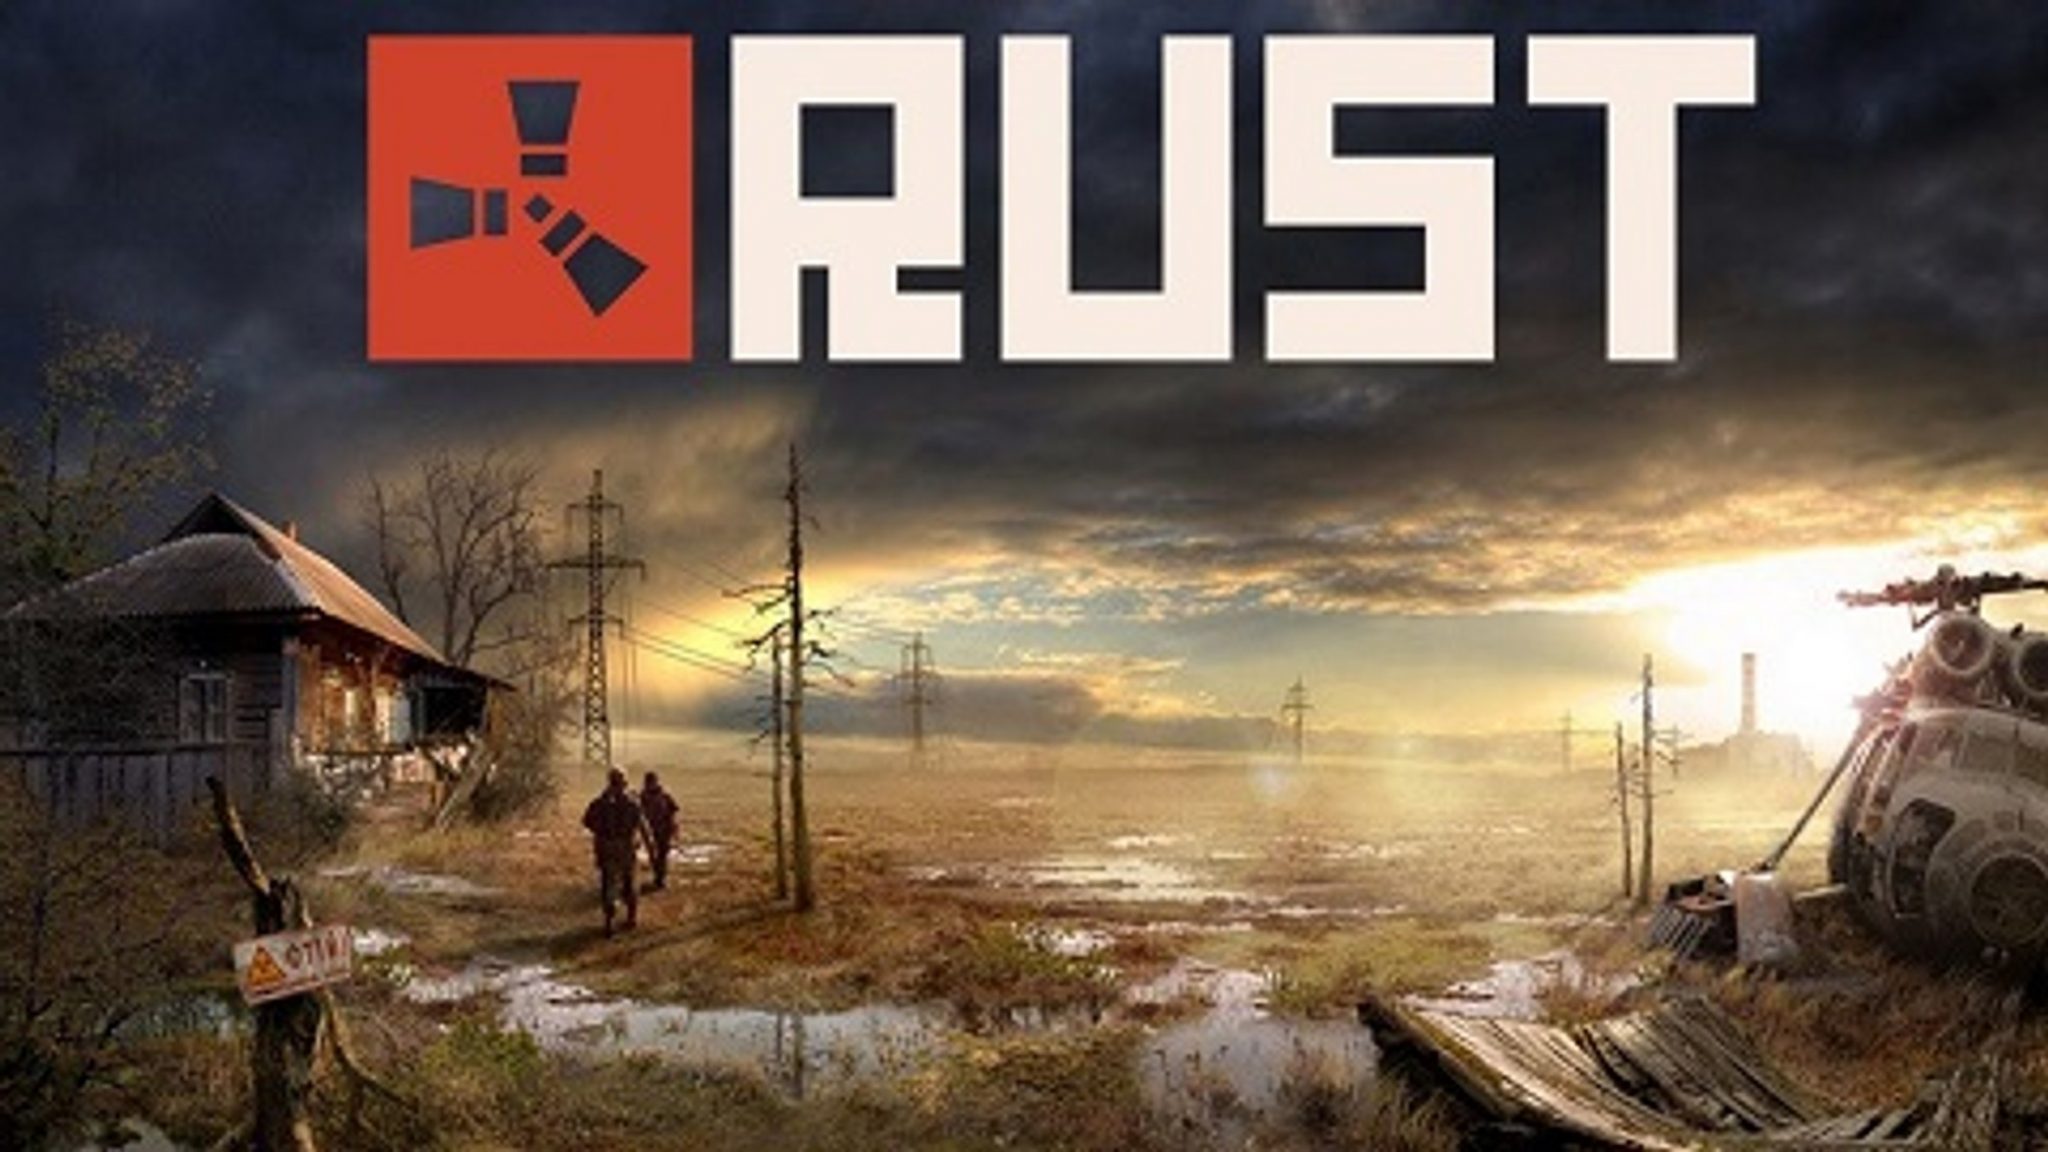 download rust for android